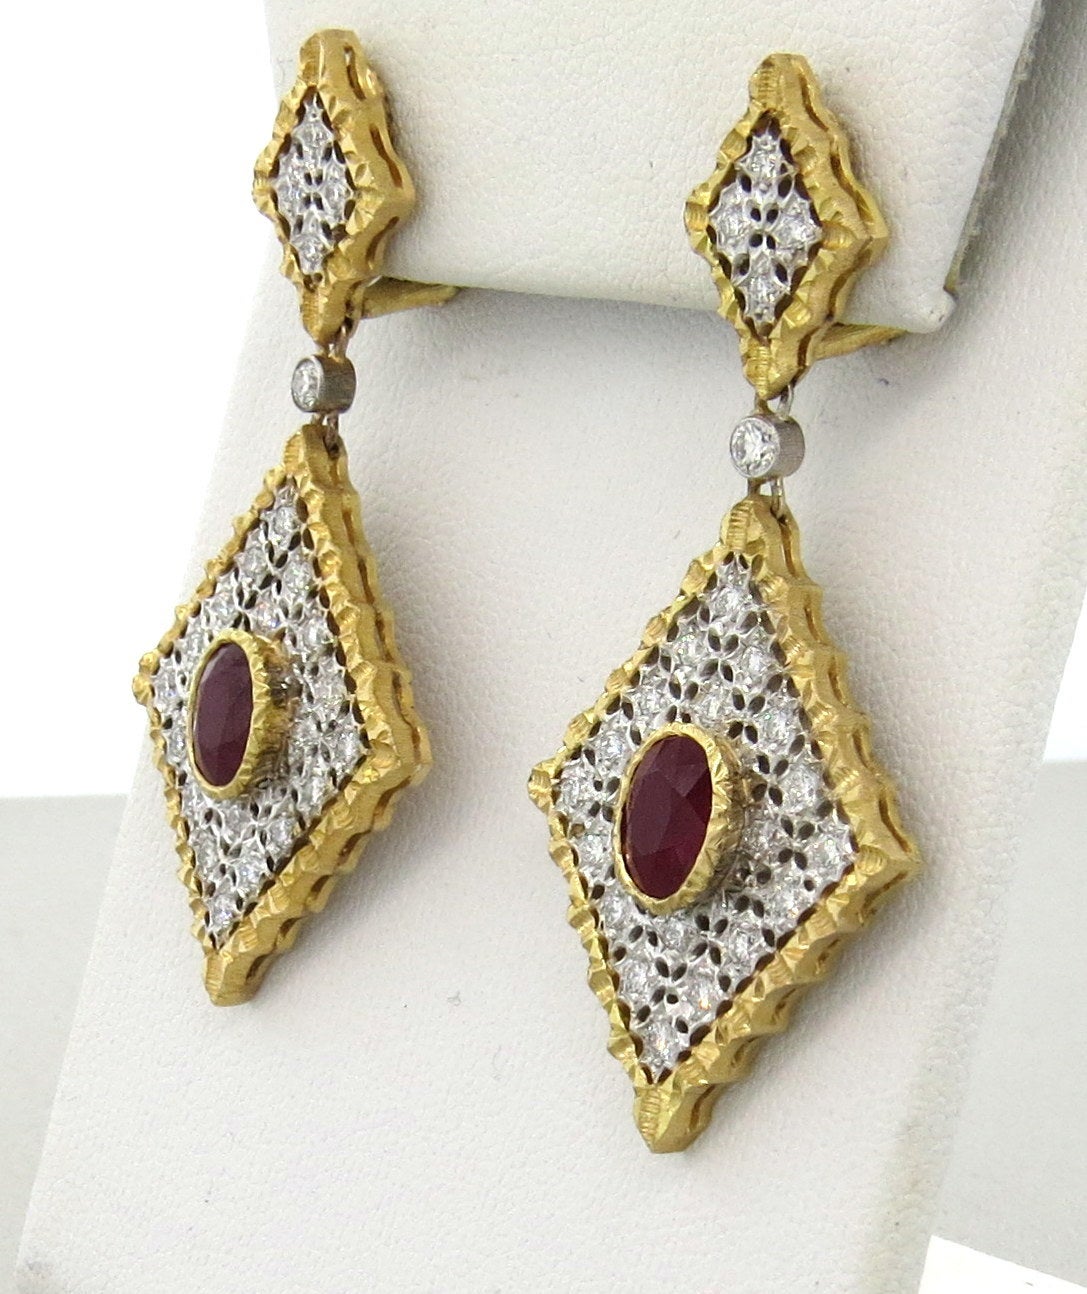 A pair of 18k yellow and white gold earring set with approximately 0.75ctw in G/VS diamonds and 2.60ctw in rubies.  Crafted by Mario Buccellati, the earrings measure 53mm x 24mm and weigh 18.9 grams.